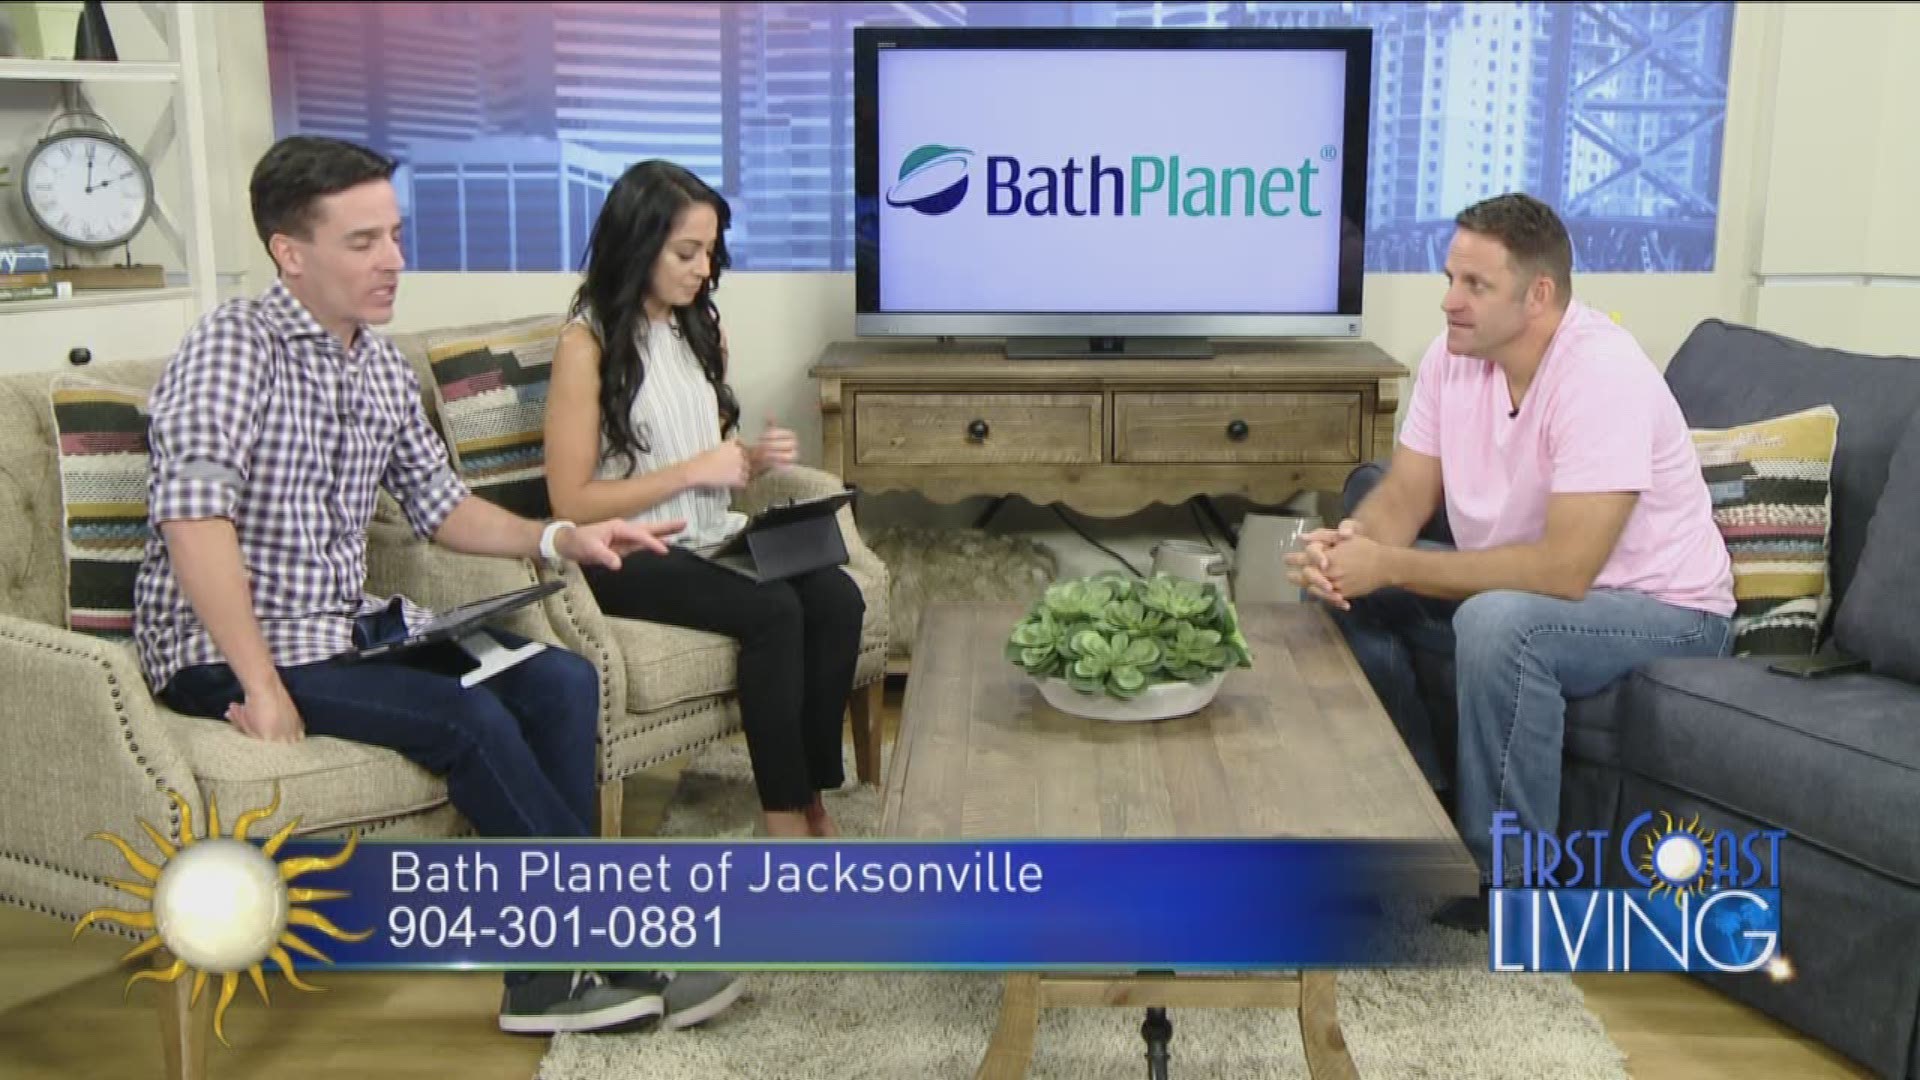 Update your Bathroom with Bath Planet